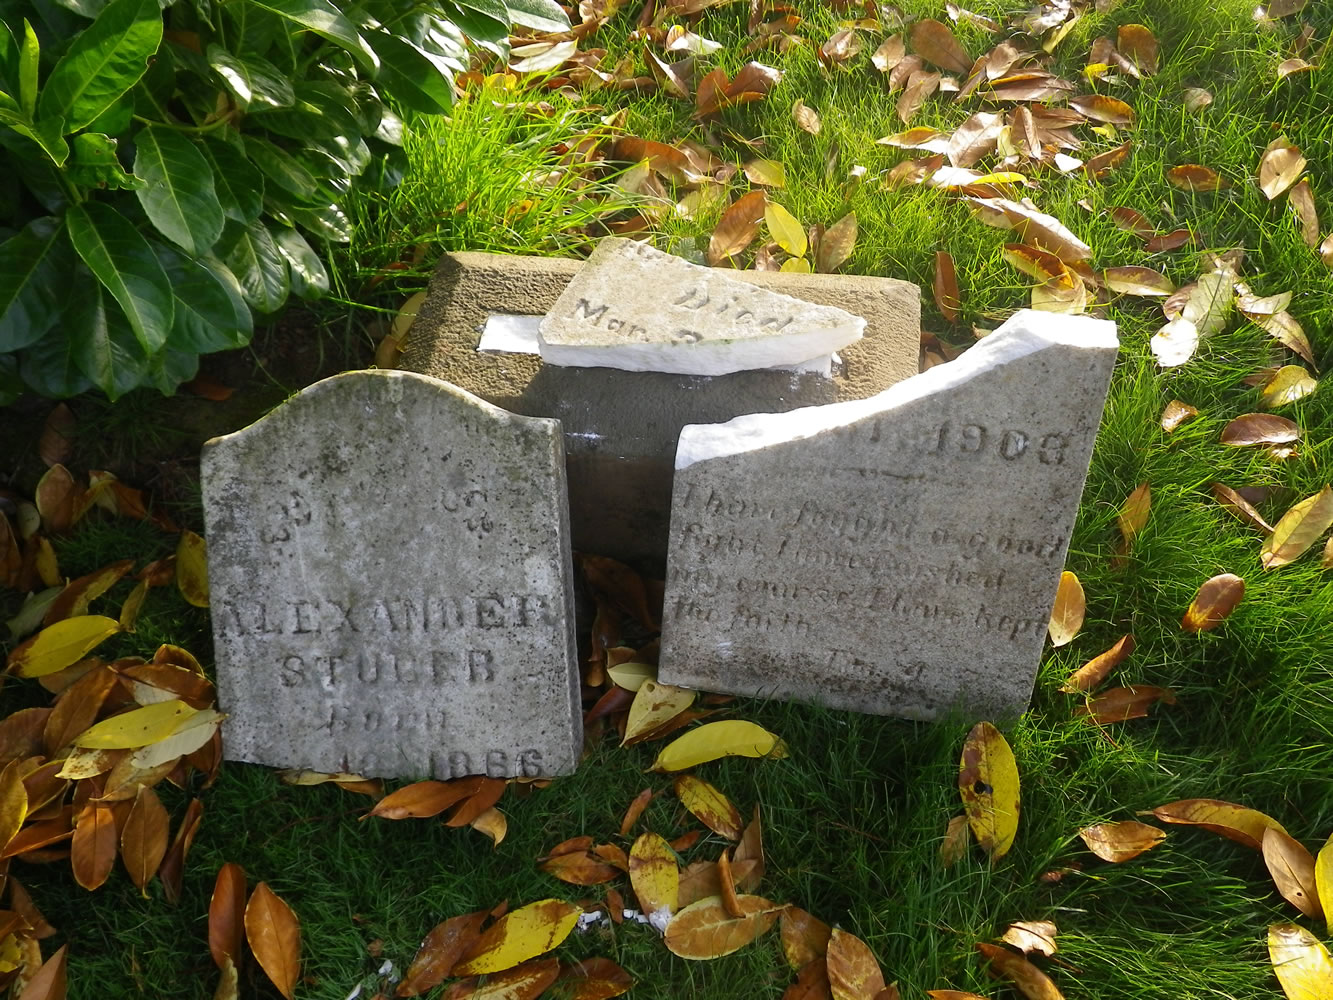 Camas police are investigating a vandalism at Camas Cemetery where 16 headstones were toppled over, some of which were damaged.